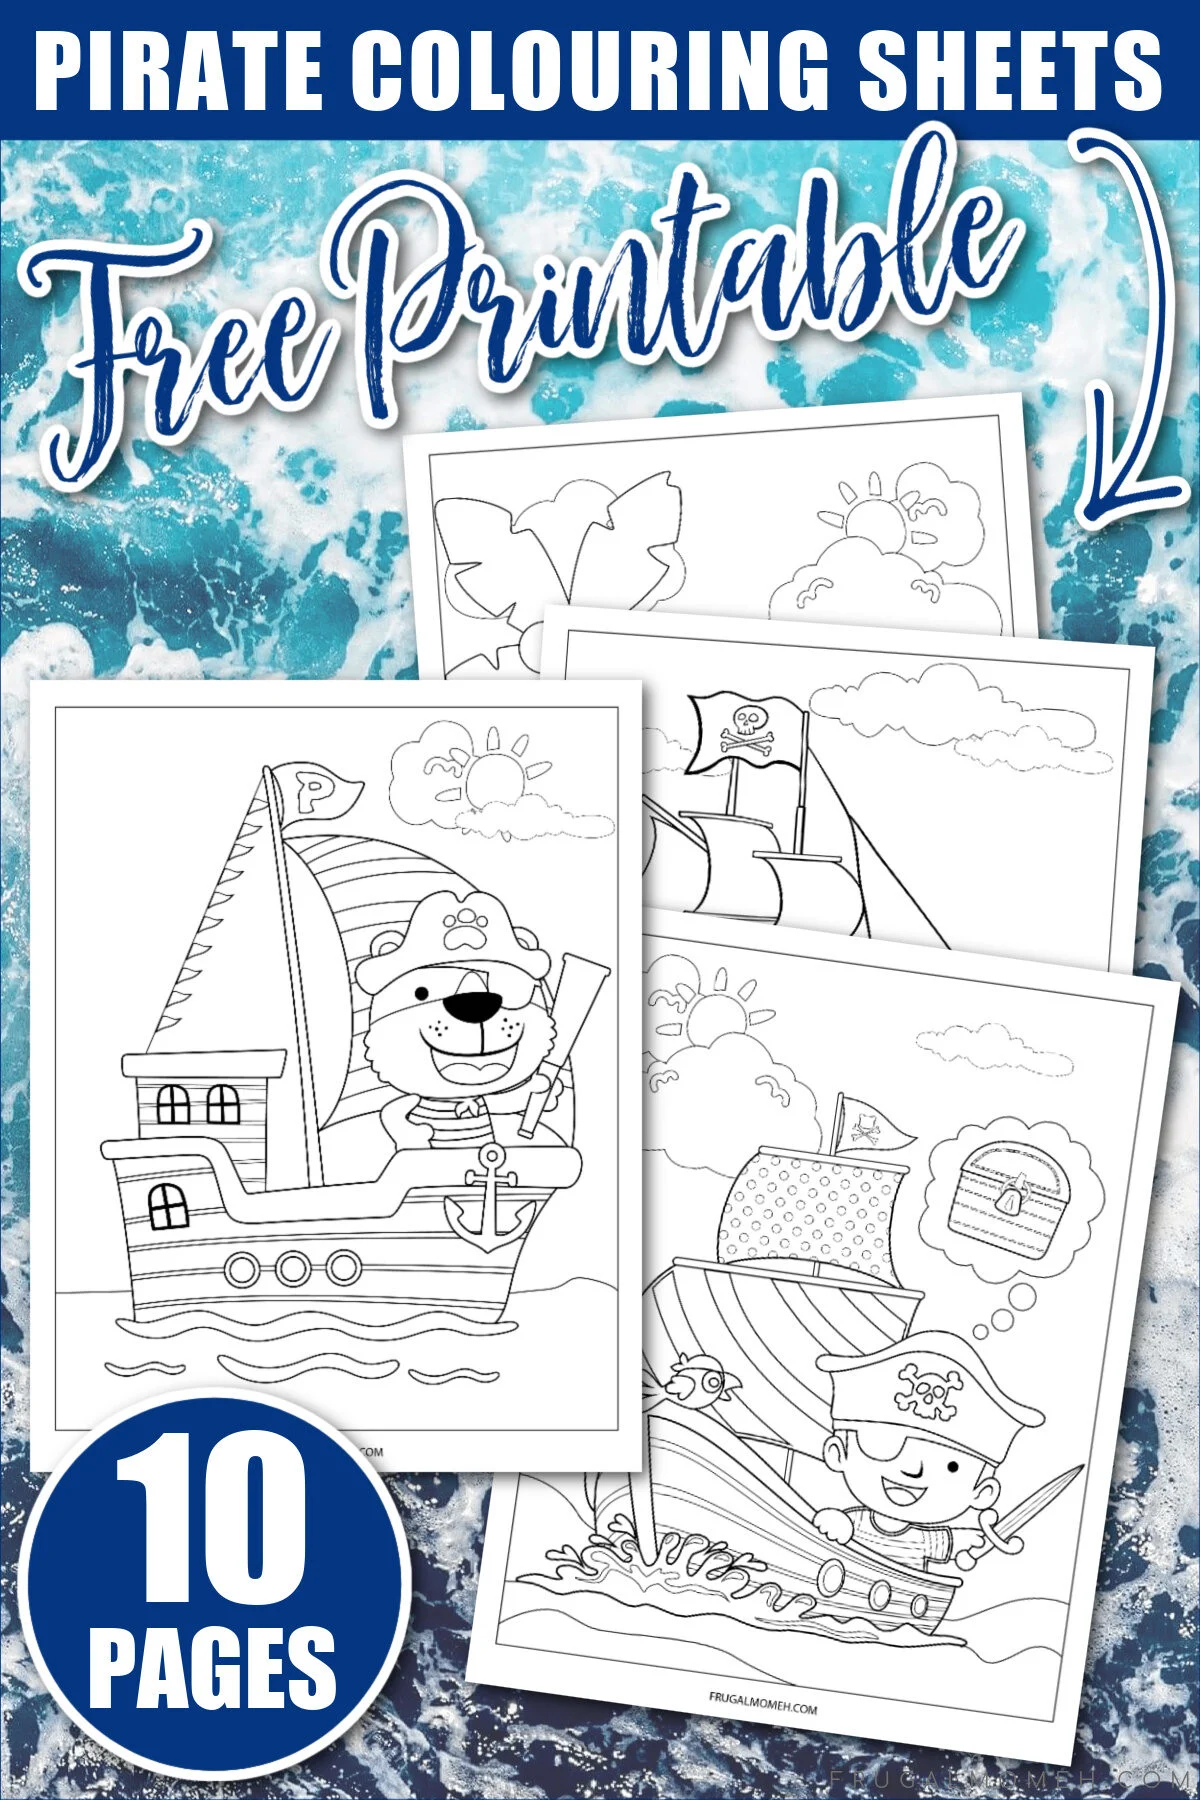 Ahoy, mateys! Download these 10 FREE printable Pirate colouring pages for kids. Guaranteed to keep the little buccaneers entertained!